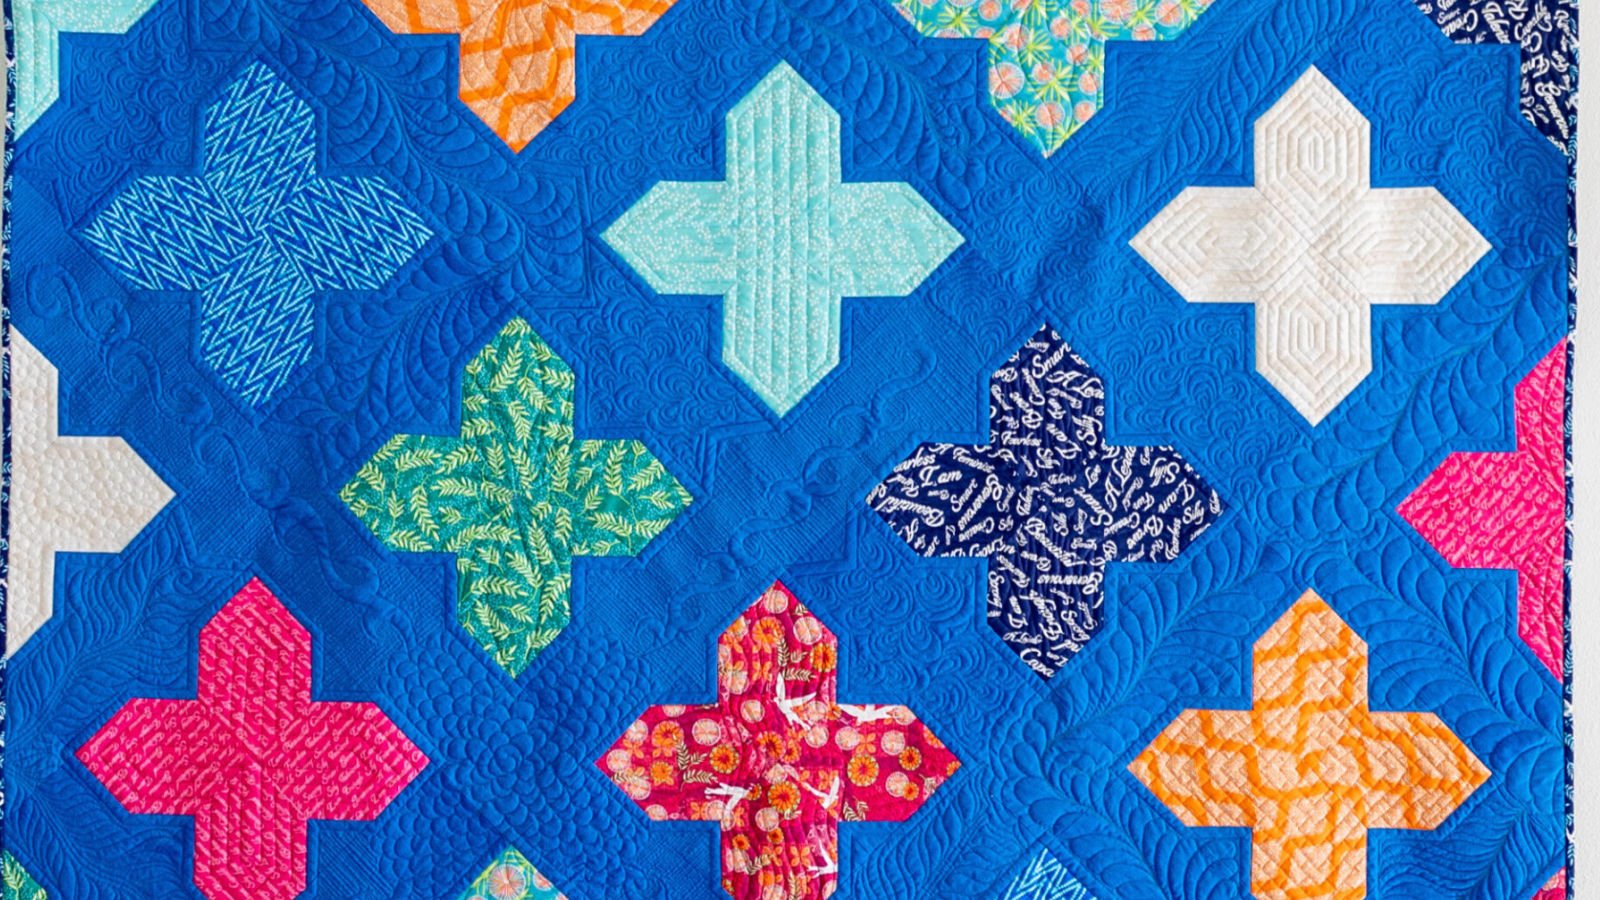 <p>Are you looking for fat quarter-friendly quilt patterns?</p> <p>Sew through your stash of fat quarters with 15 beautiful fat quarter throw quilt patterns. Fat quarter-friendly quilts are great for beginner quilters (and quilters of all levels) because you can purchase a perfectly coordinated bundle of fabrics. So get those fat quarter stacks off your shelves and sewn into beautiful quilts. Of course, you can also use your fabric stash too.</p> <p>All of these free patterns include step-by-step photo instructions.</p>